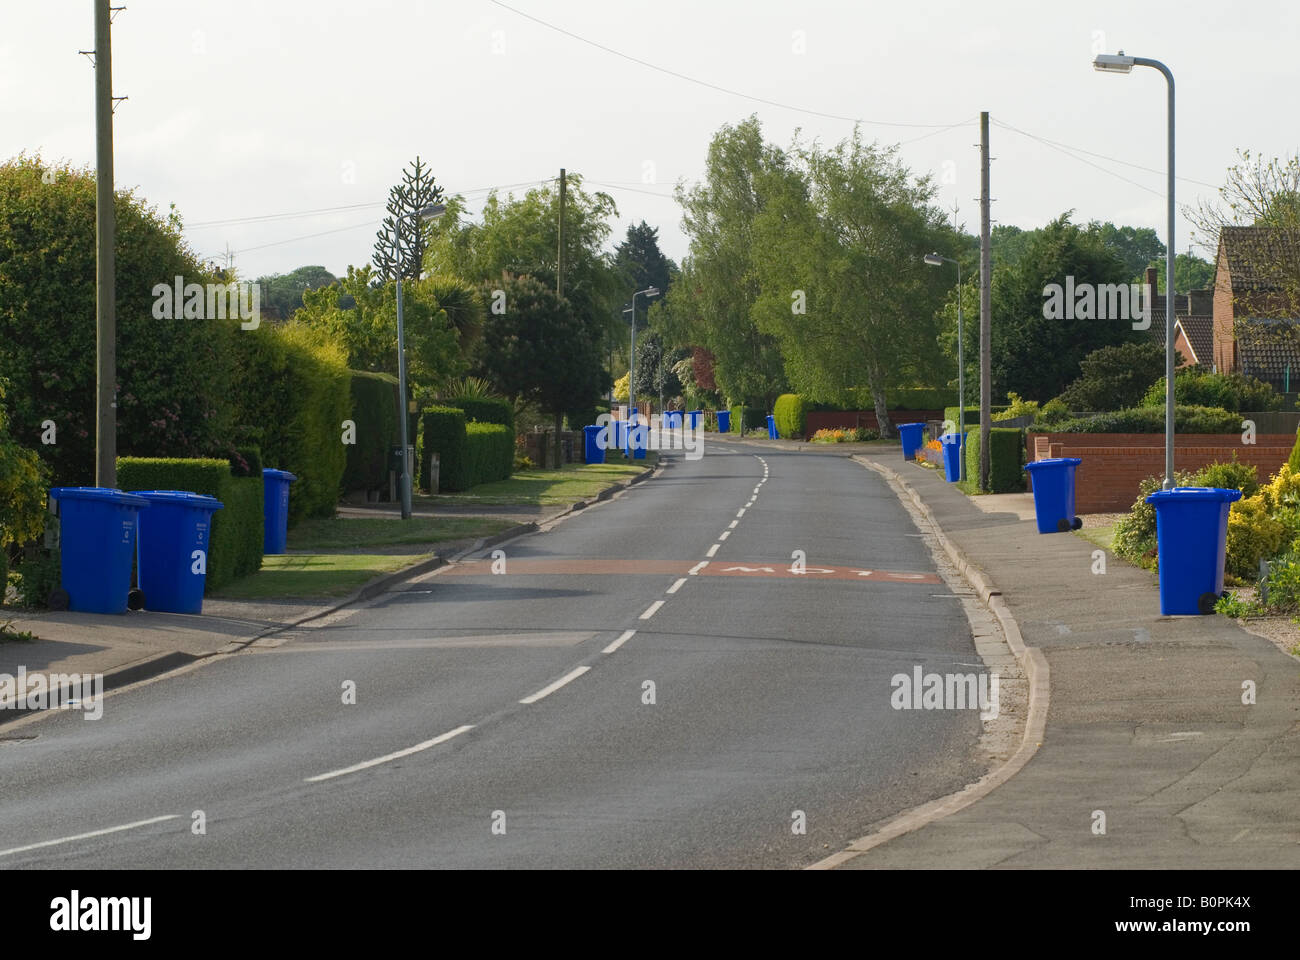 Weelie Bin blue bins Boston Lincolnshire refuse collection day, UK 2008 2000s HOMER SYKES Stock Photo